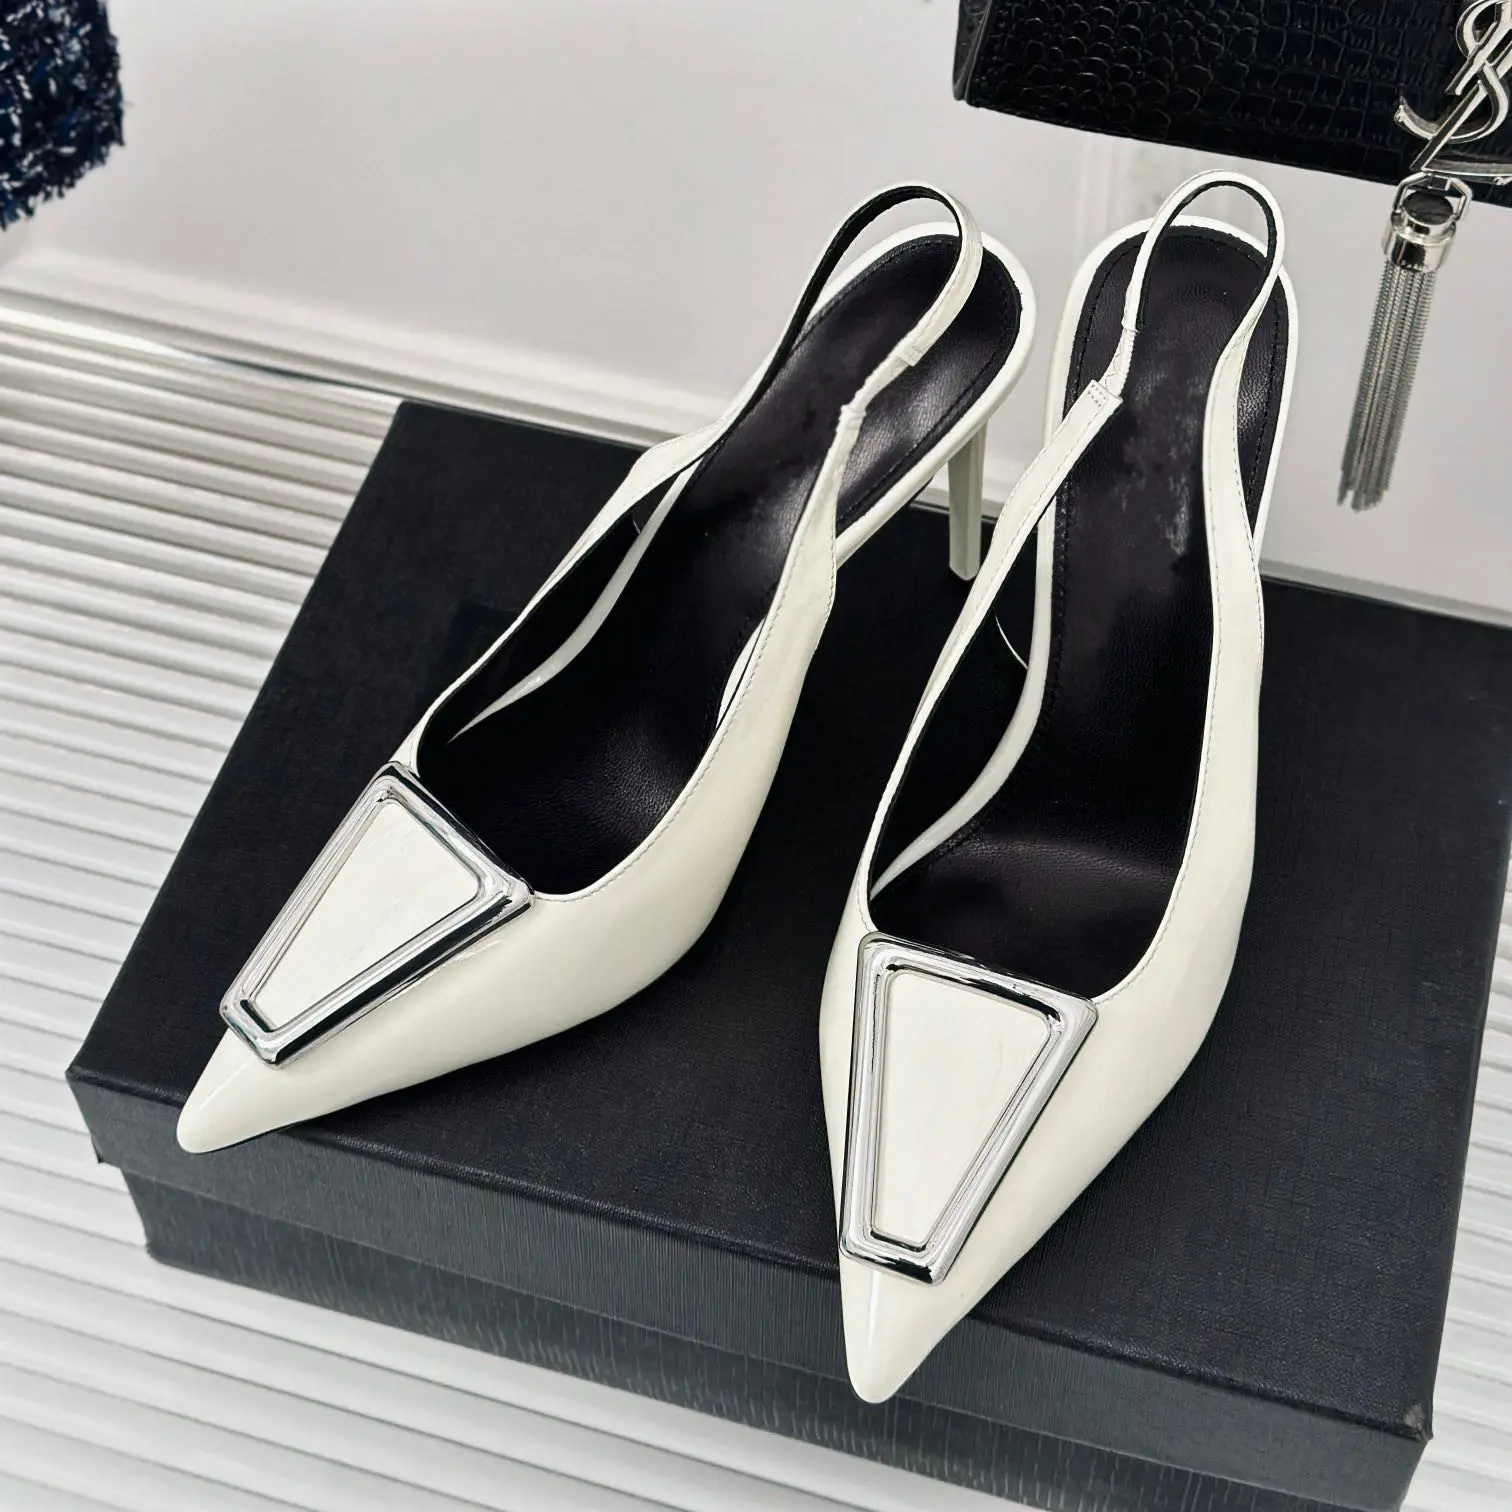 Casual Designer Fashion Women Shoes Sexy Lady White Patent Leather Strappy Pointy Toe High Heels Sandals Zapatos Mujer Sandals casual designer fashion women shoes lady genuine leather black satin flowers pointy toe high heels sandals zapatos pumps shoes